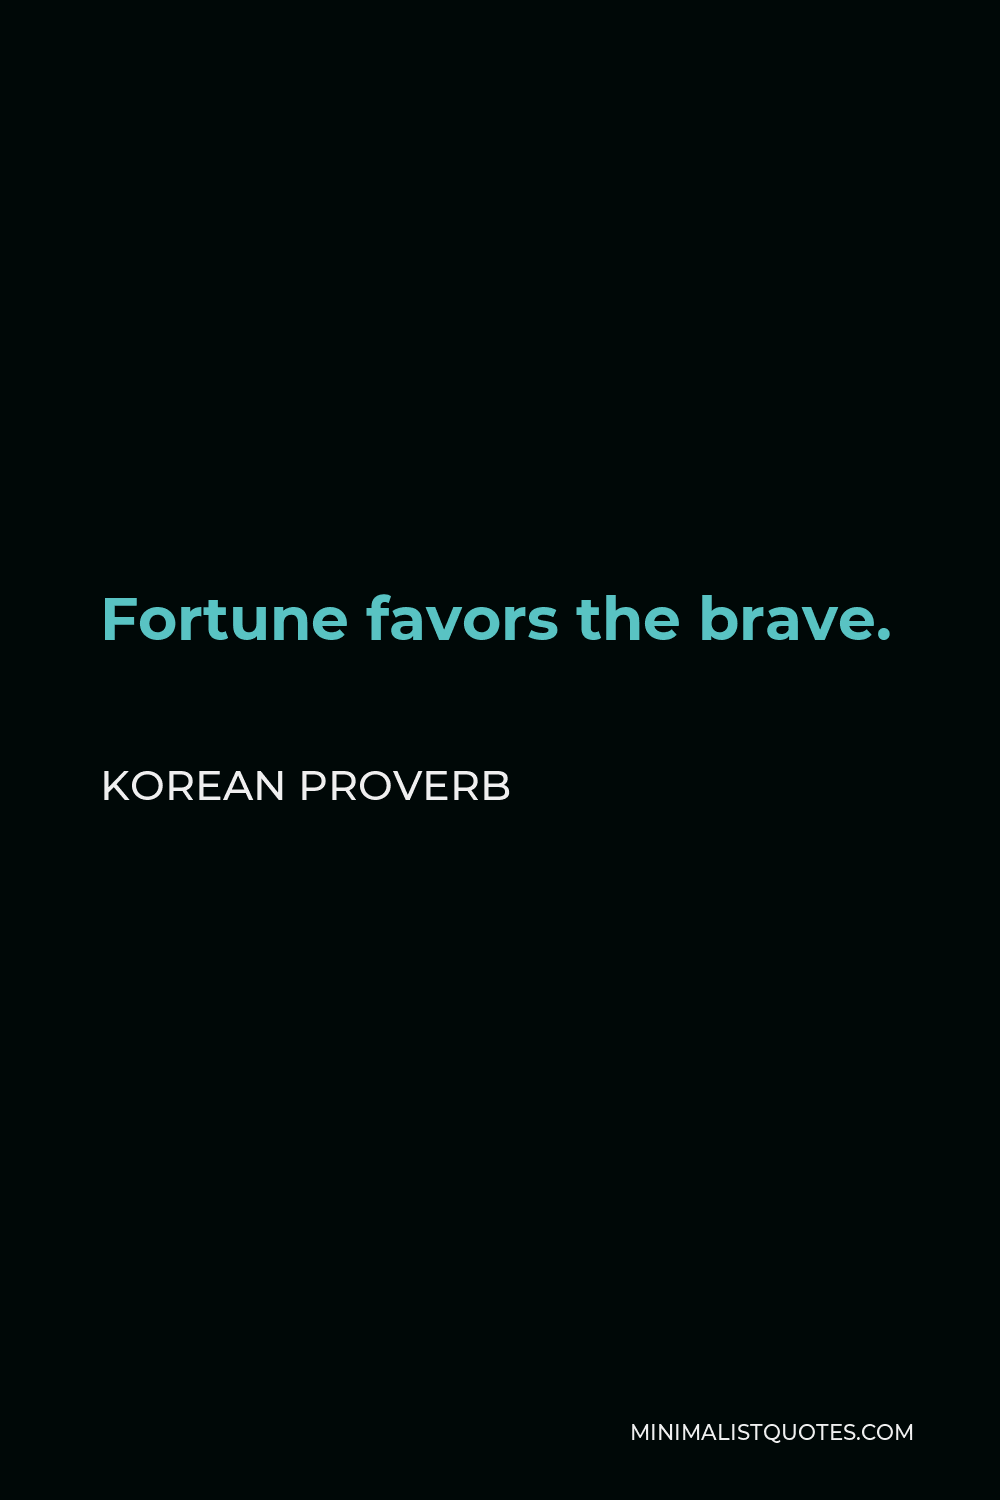 Korean Proverb Quote - Fortune favors the brave.